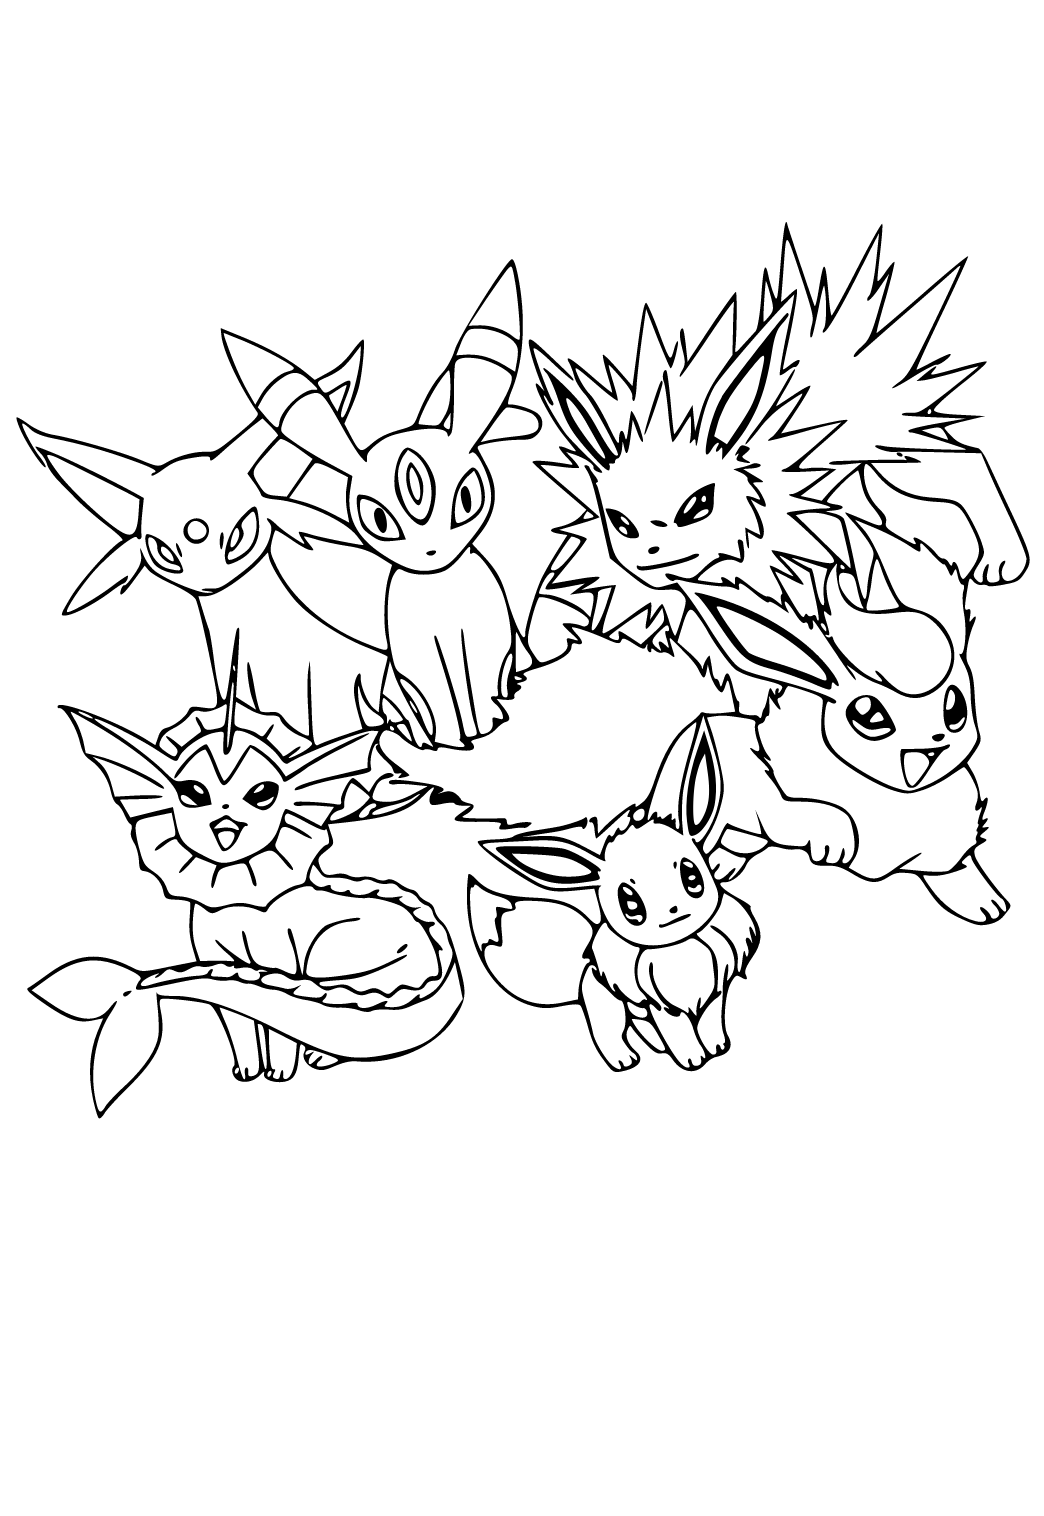 200 Eevee Coloring Pages: Evolve Your Art Skills 101